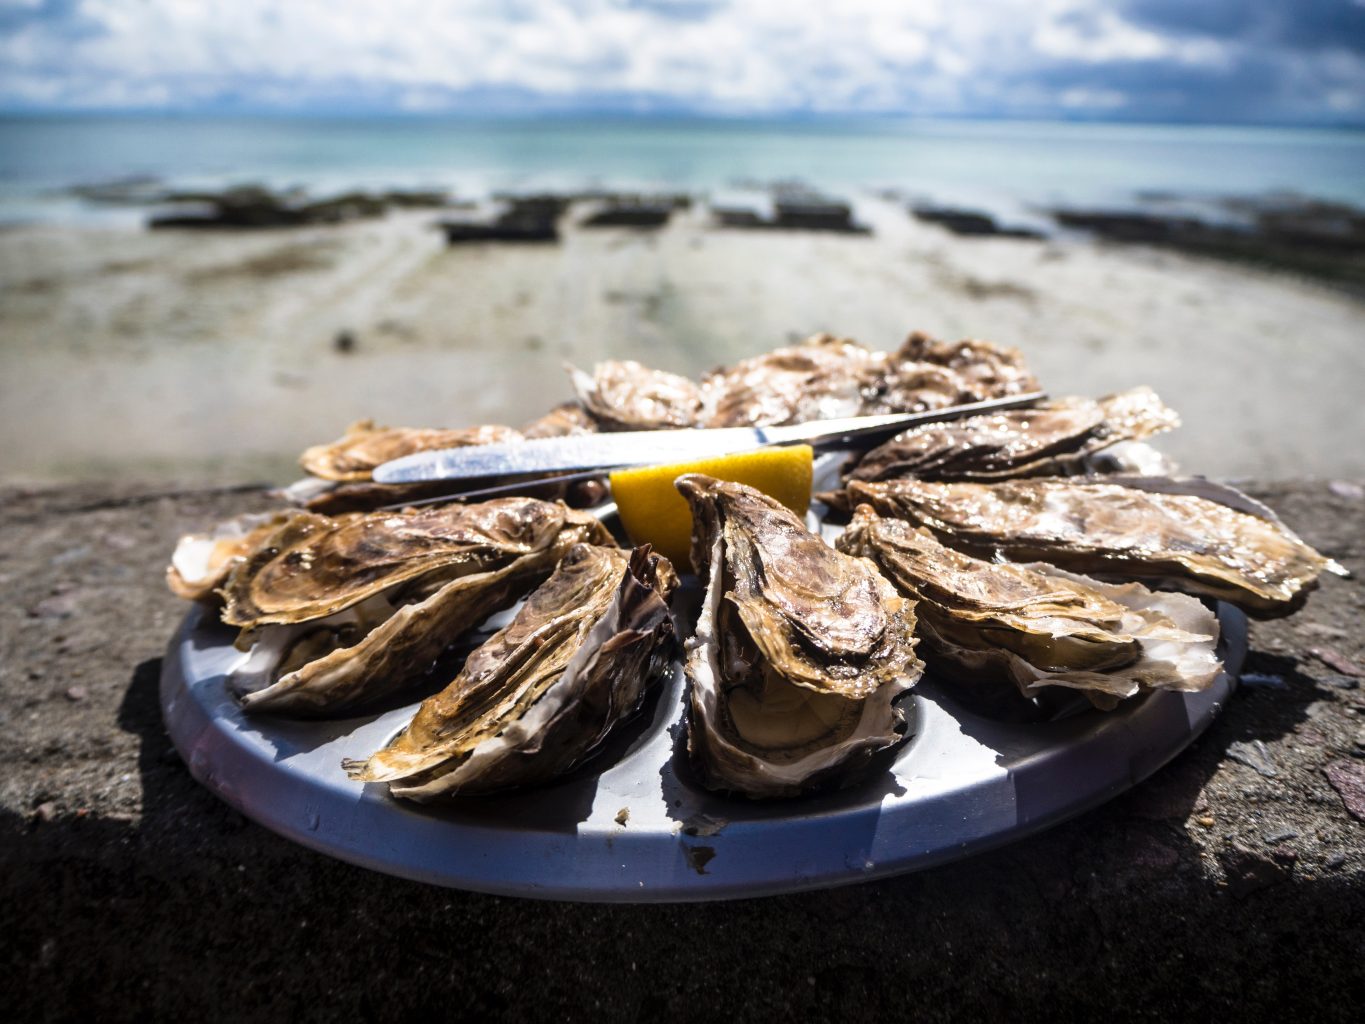 Oysters served on the beach 